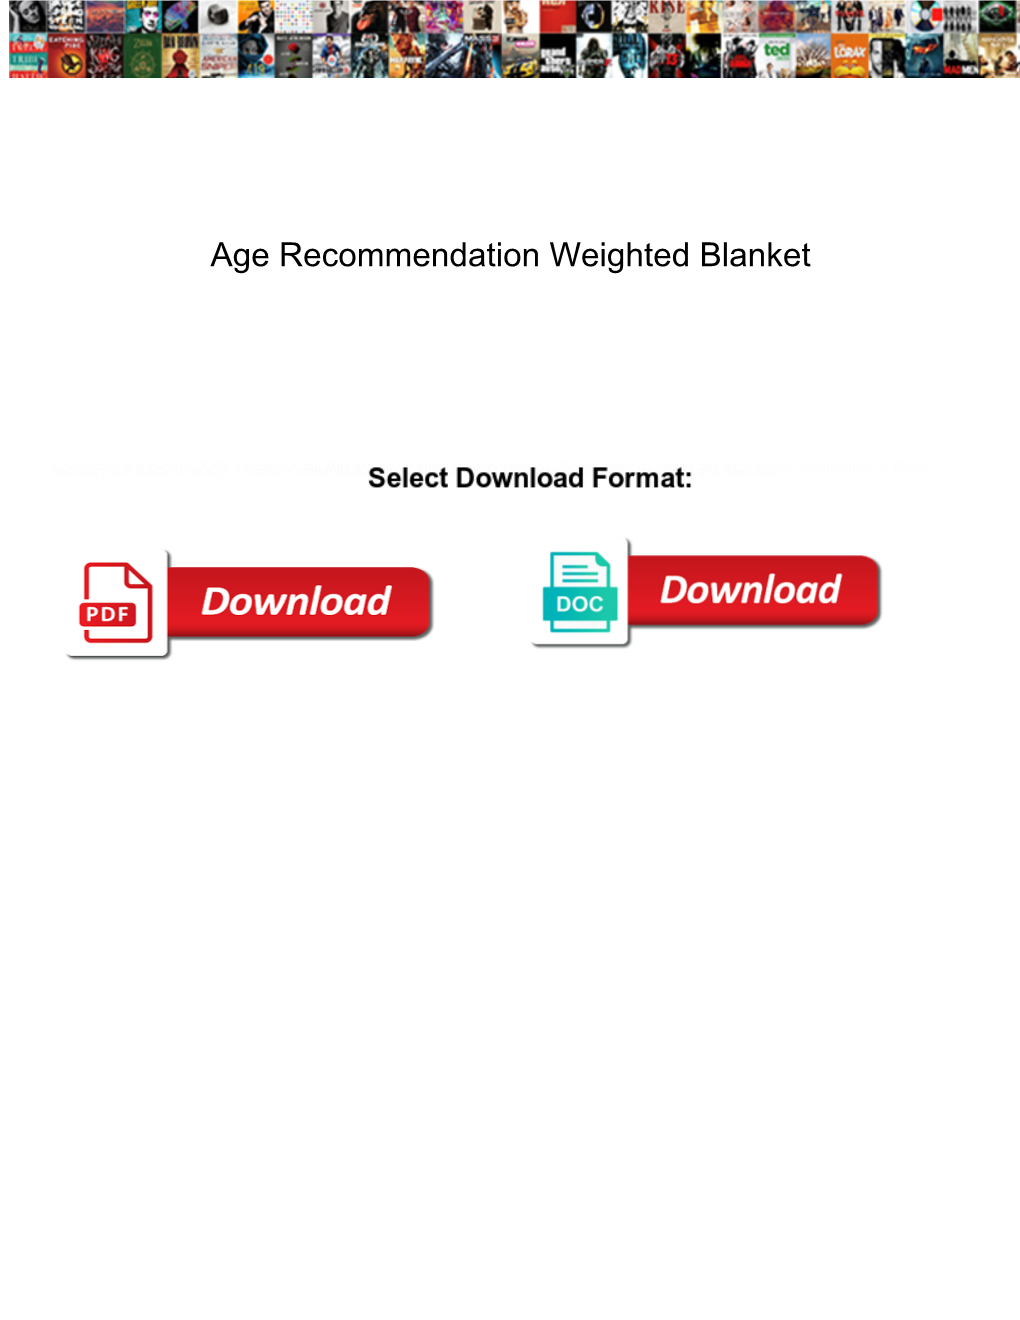 Age Recommendation Weighted Blanket